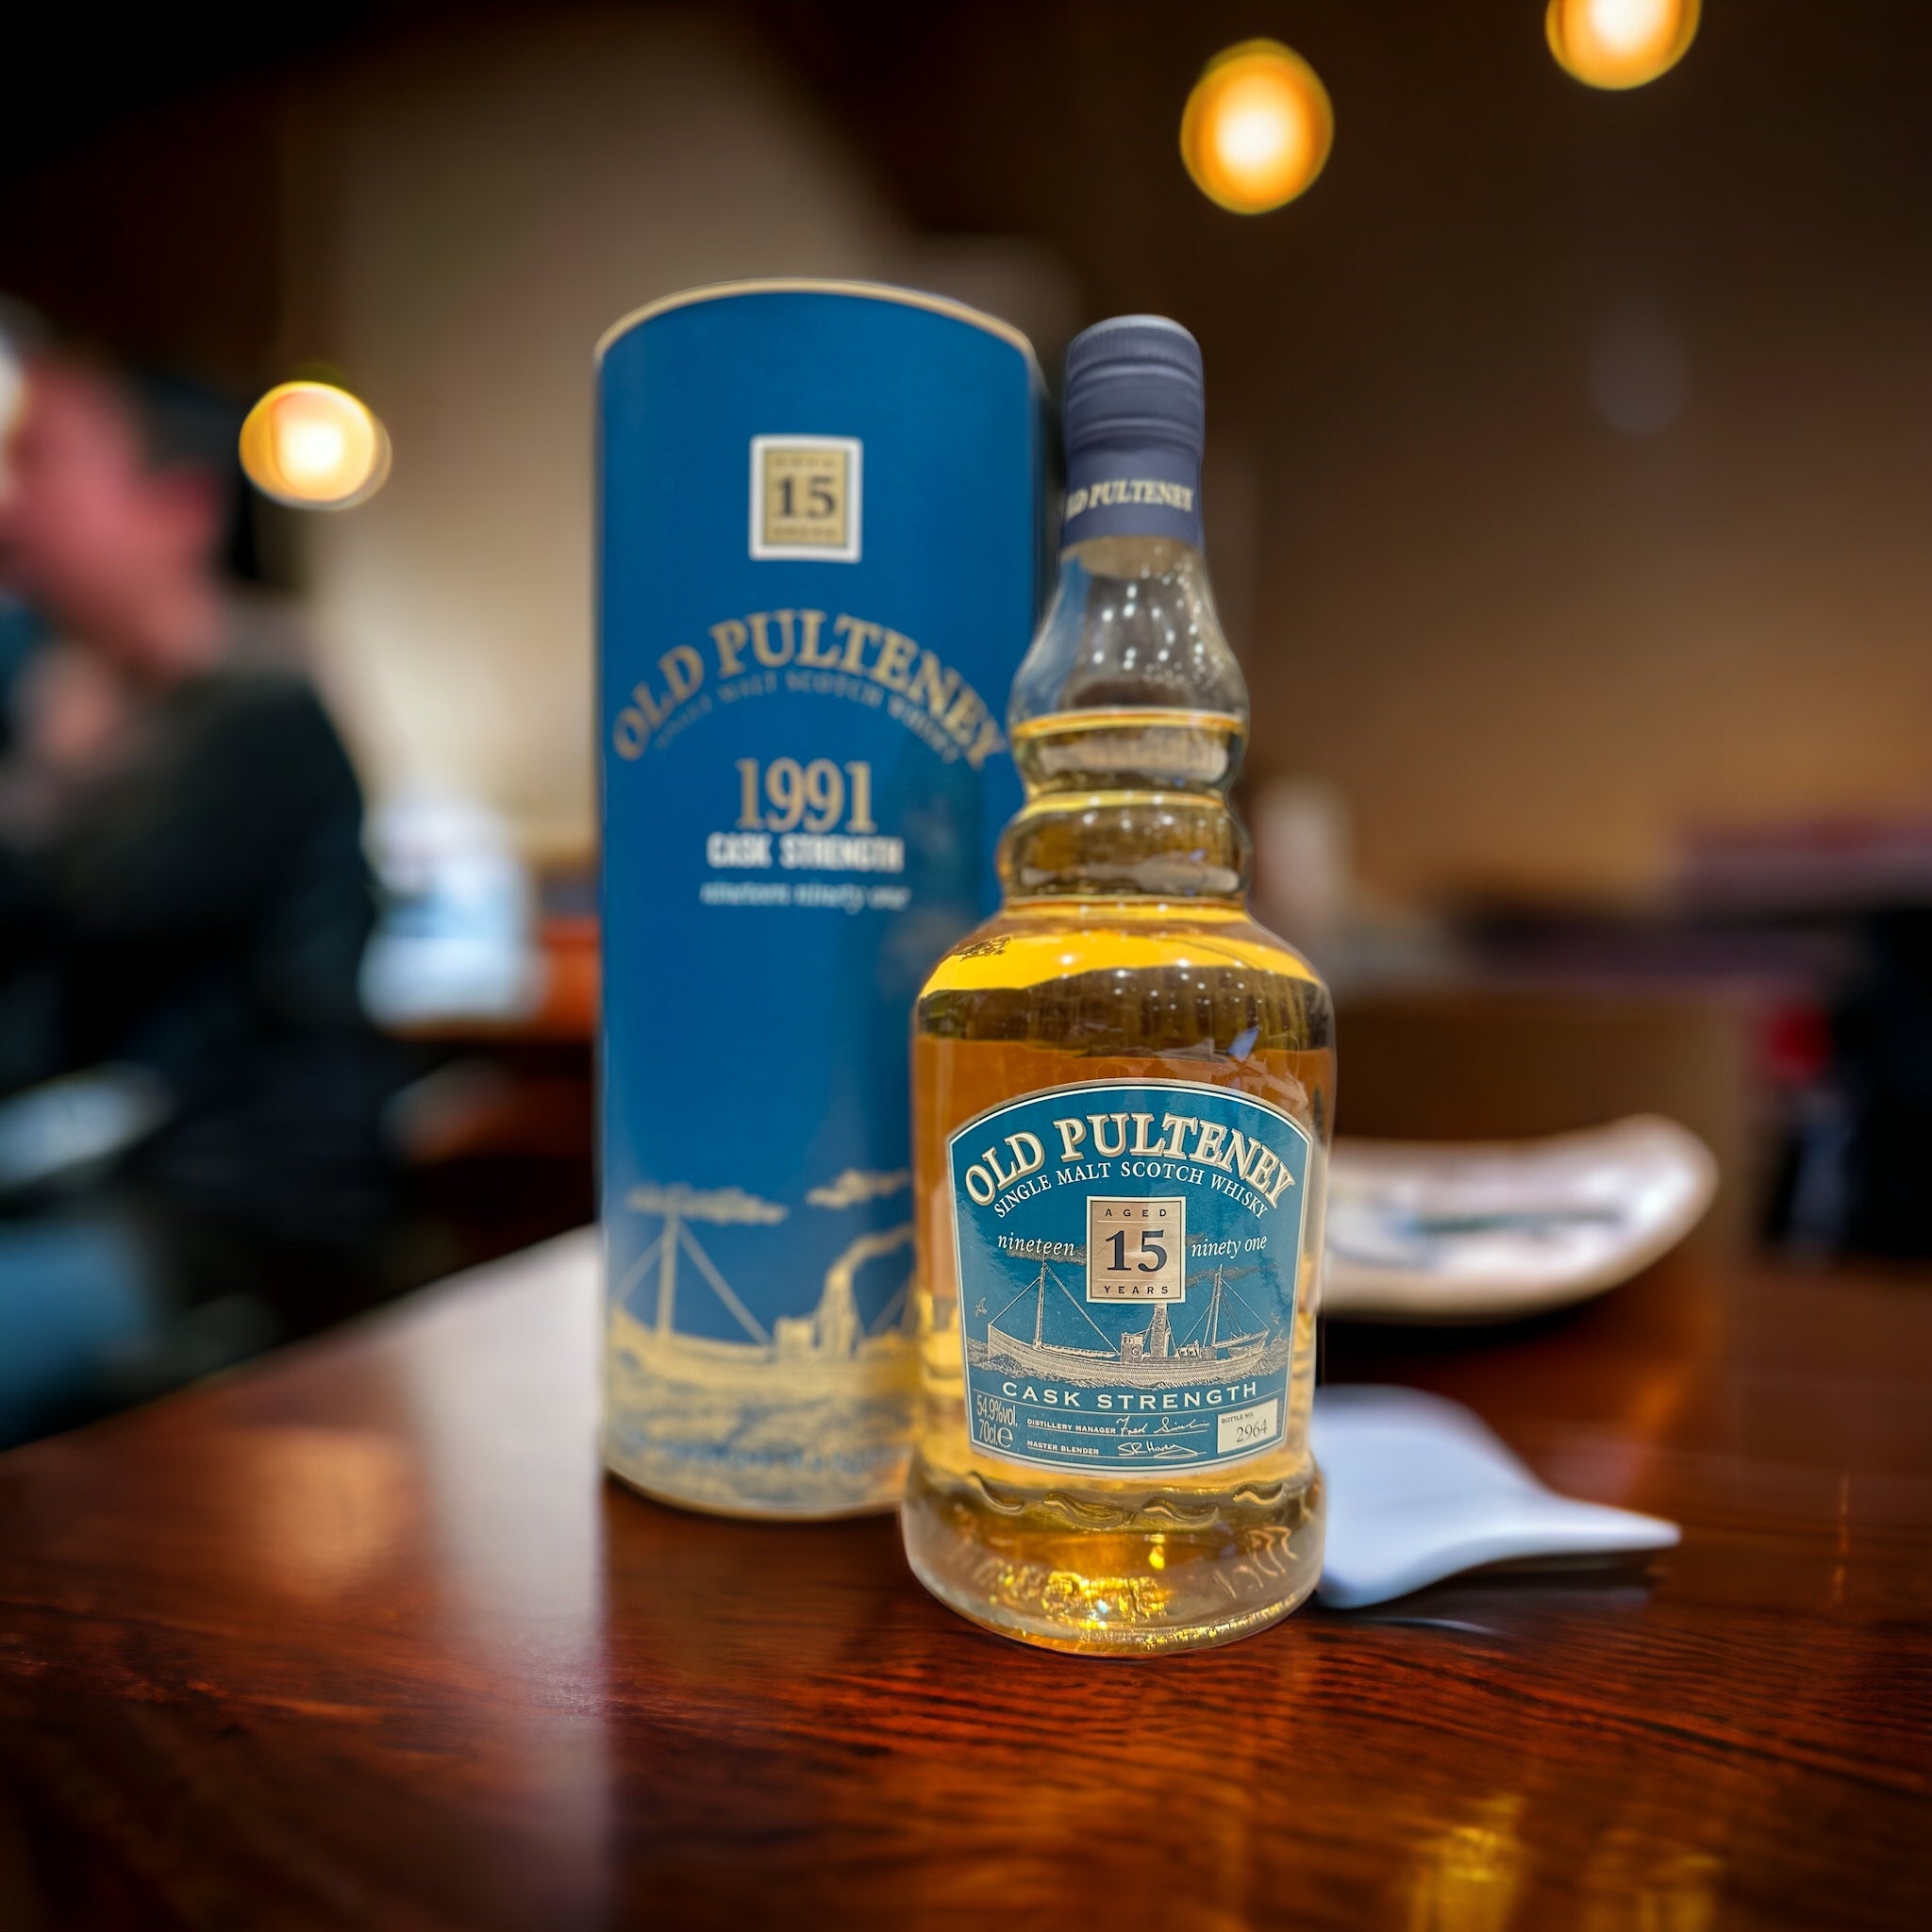 To explore a rare and exceptional Scotch whisky? This Old Pulteney expression is a fantastic choice.